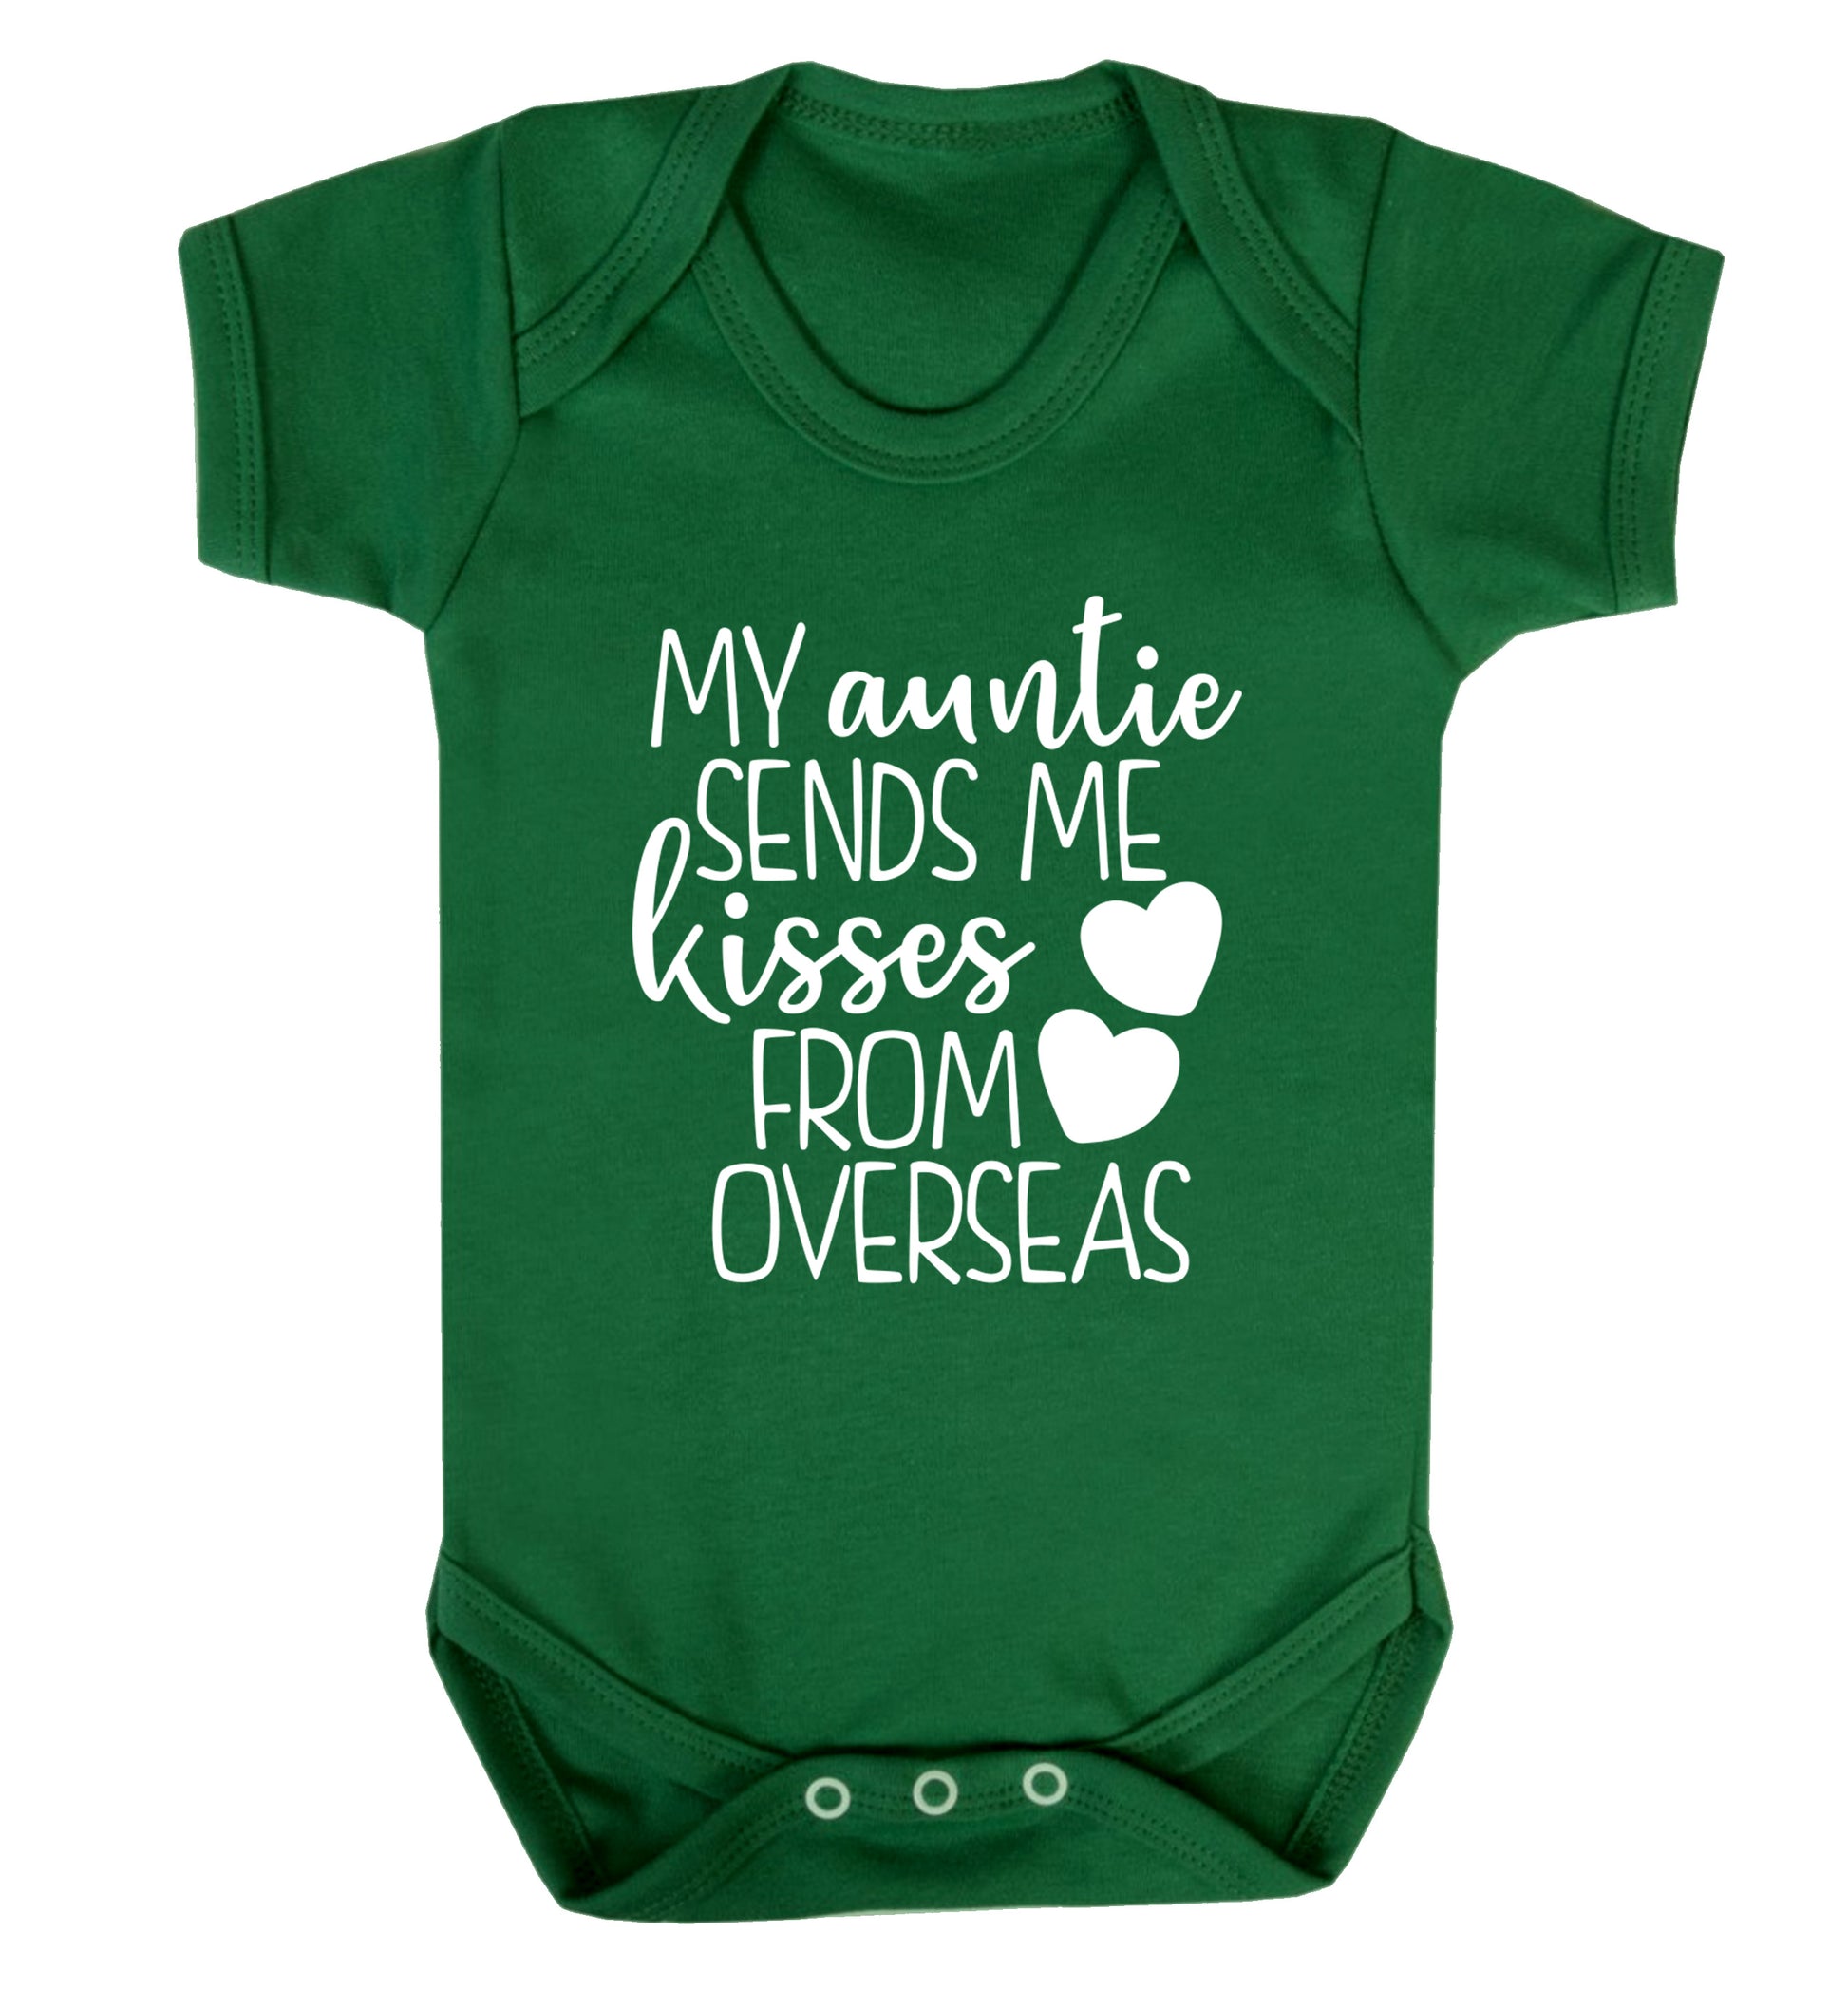 My auntie sends me kisses from overseas Baby Vest green 18-24 months